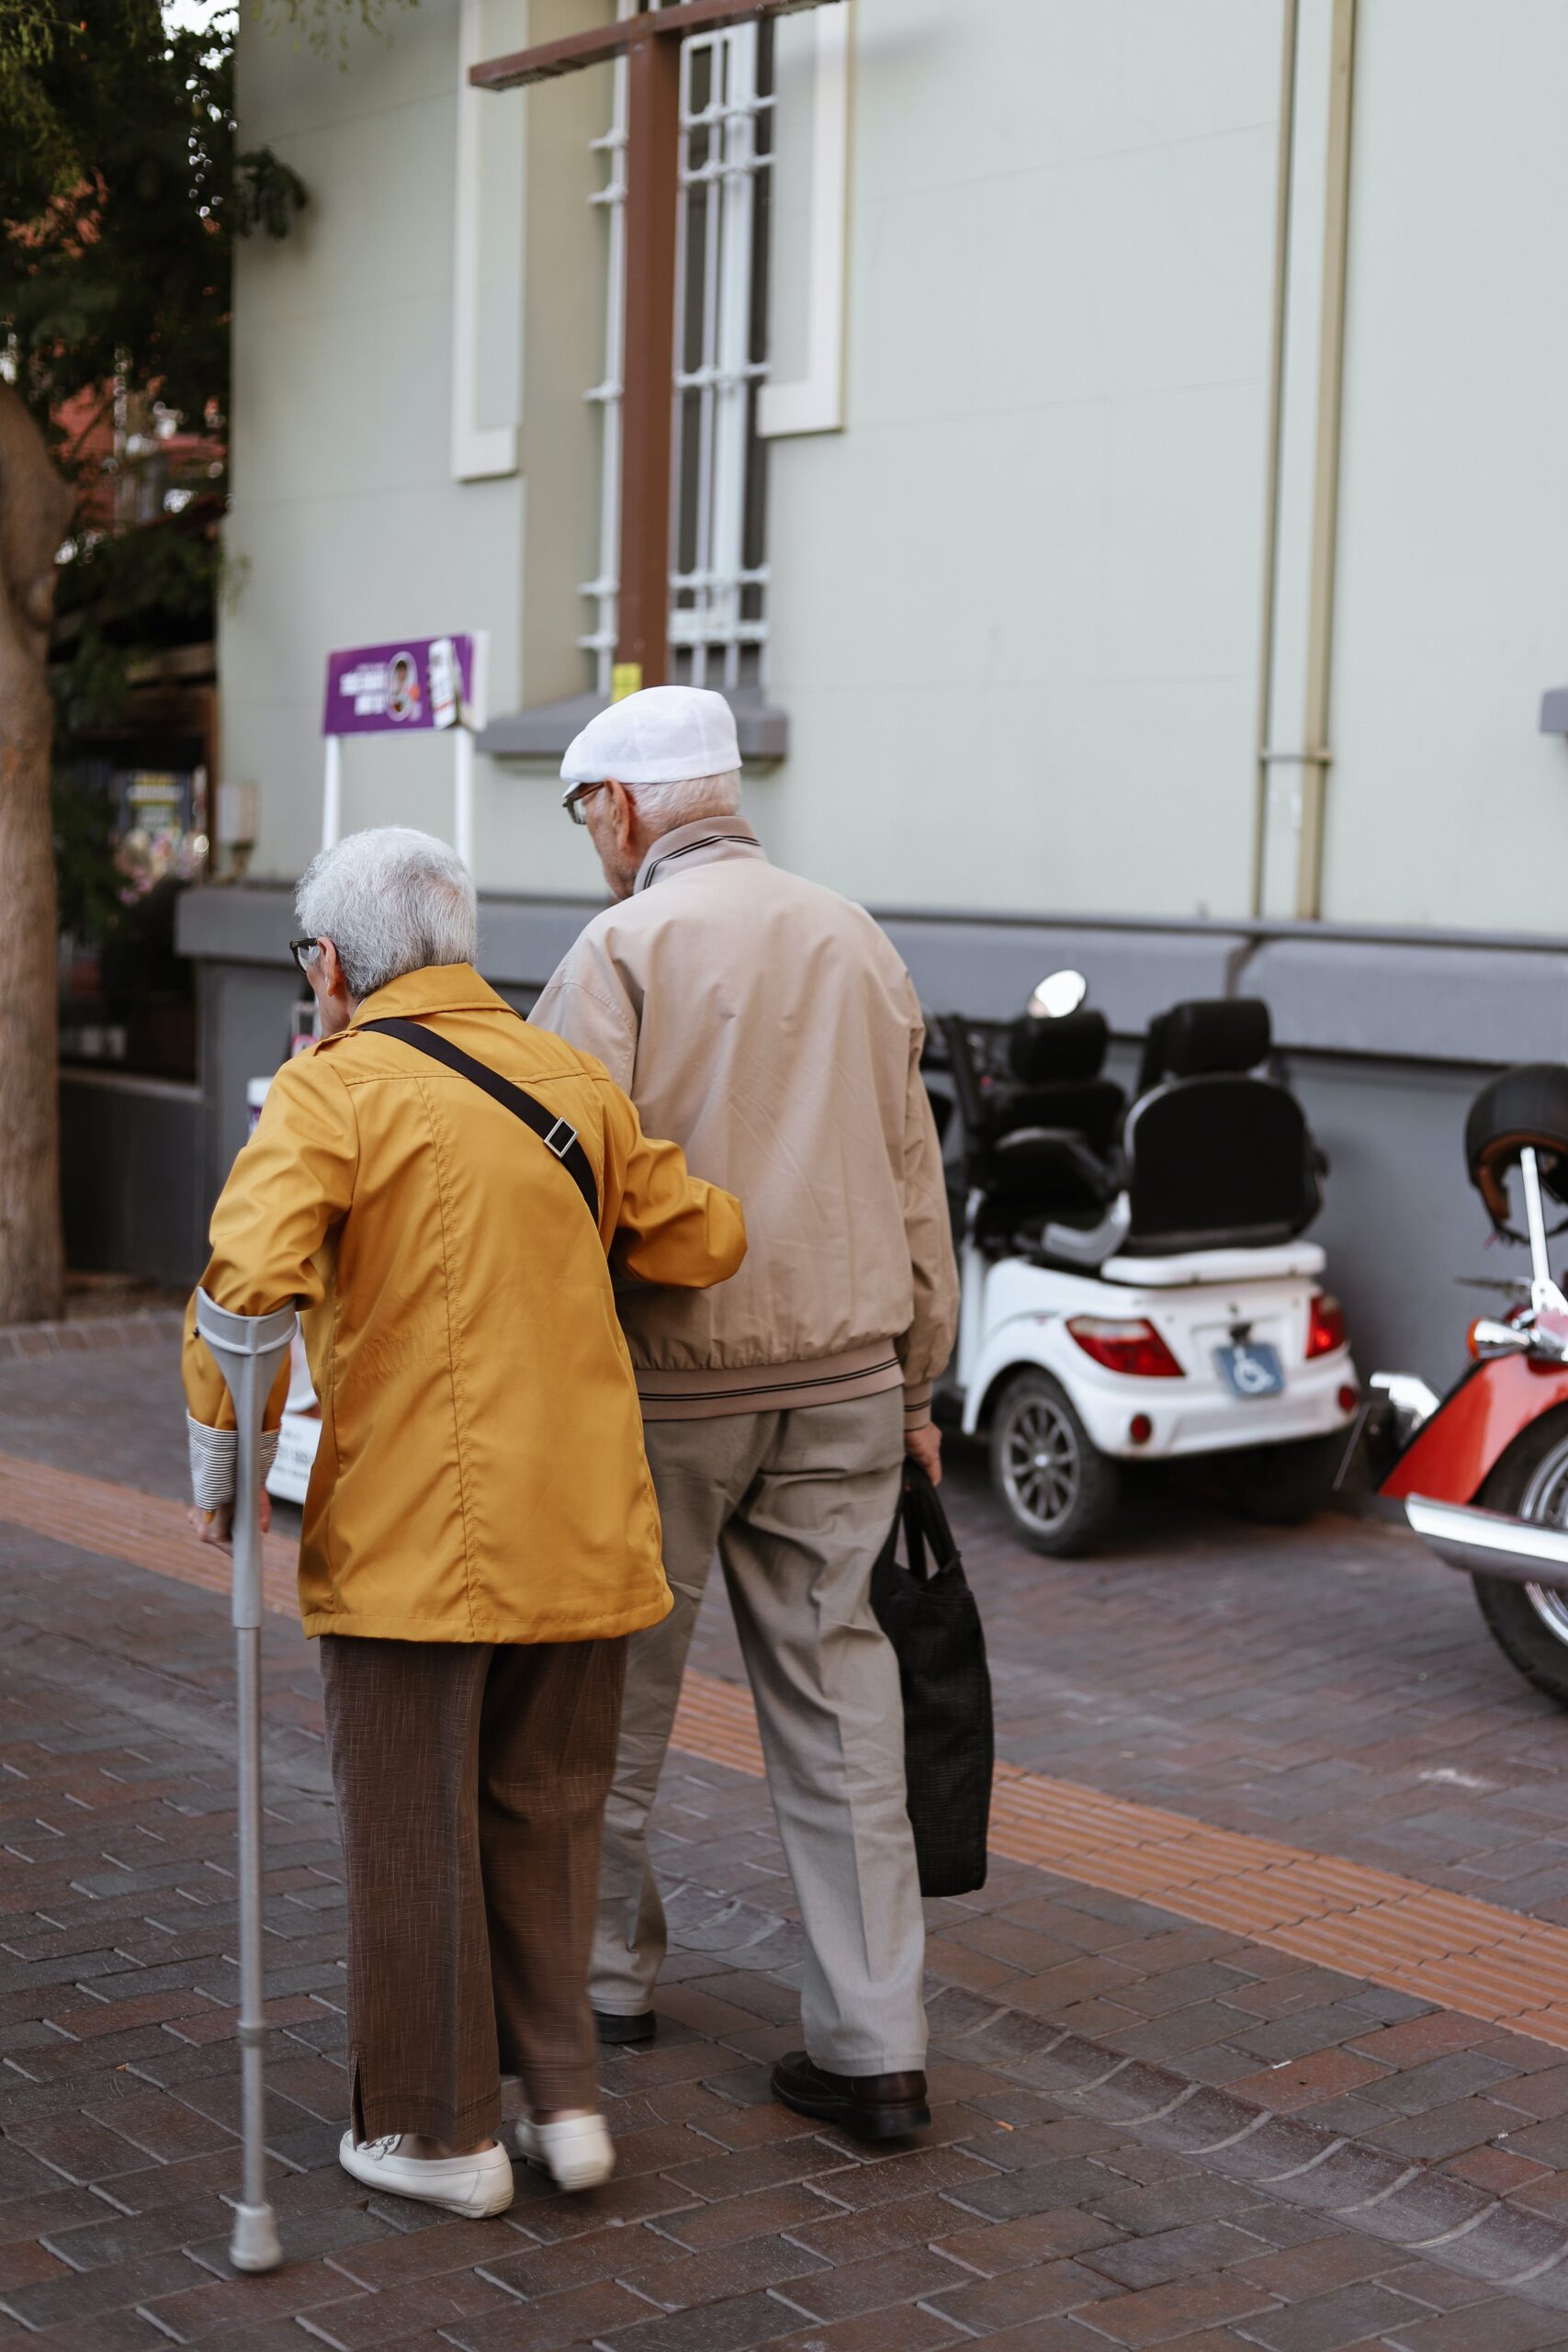 Elderly couple walking down the street, and the woman is using an arm cane.